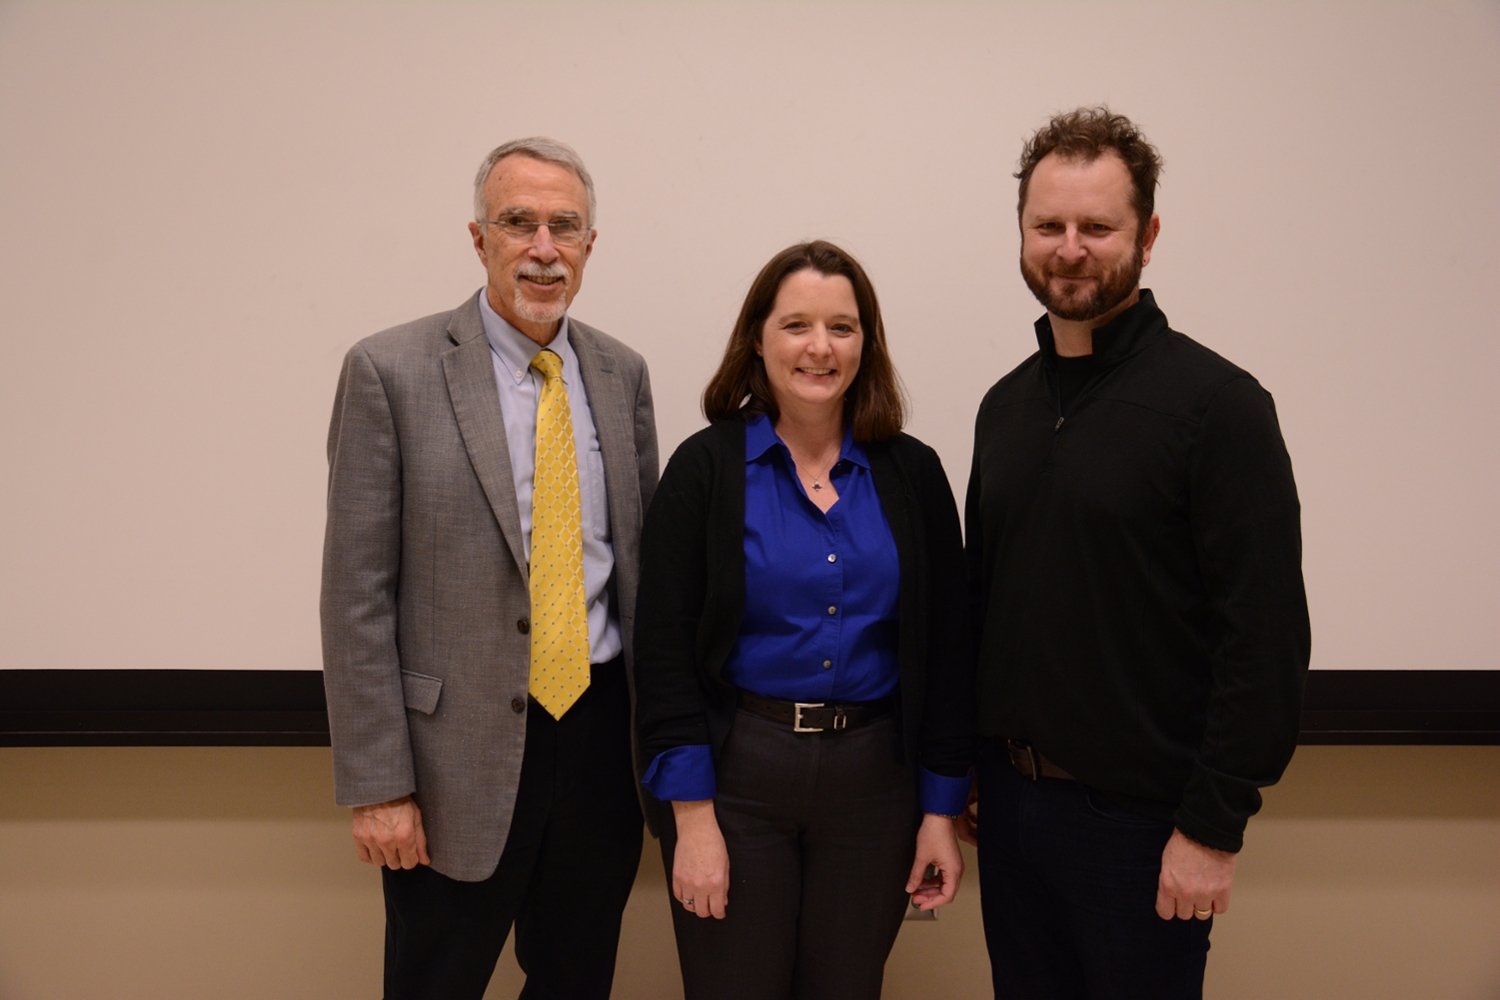 Dean Giordano with Dr. Gorden and Dr. Cobine.